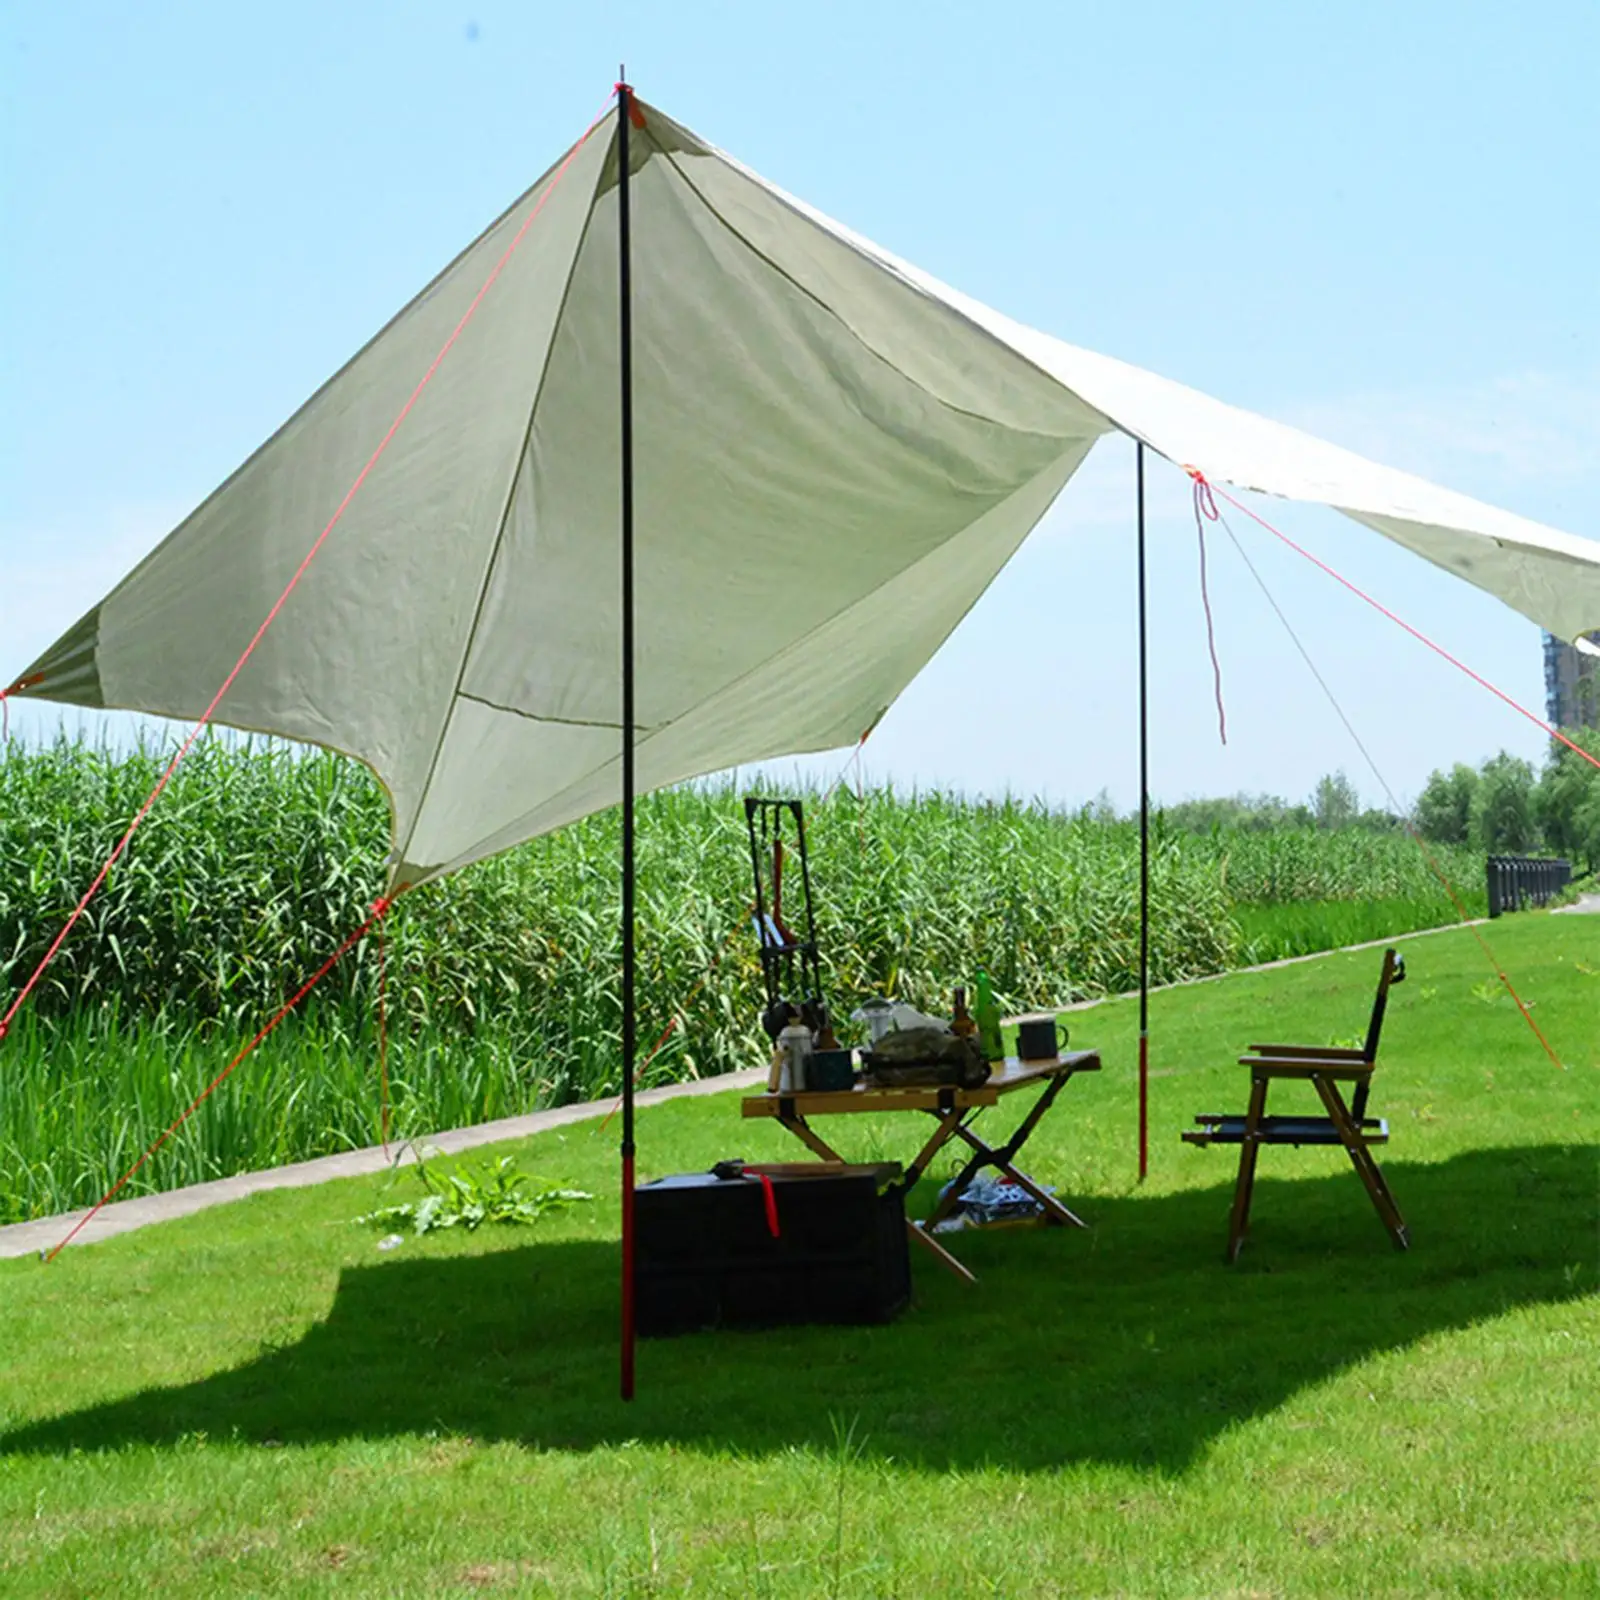 Portable Tarp Poles Tent Rods Beach Shelter W/ Storage Awning Support Canopy